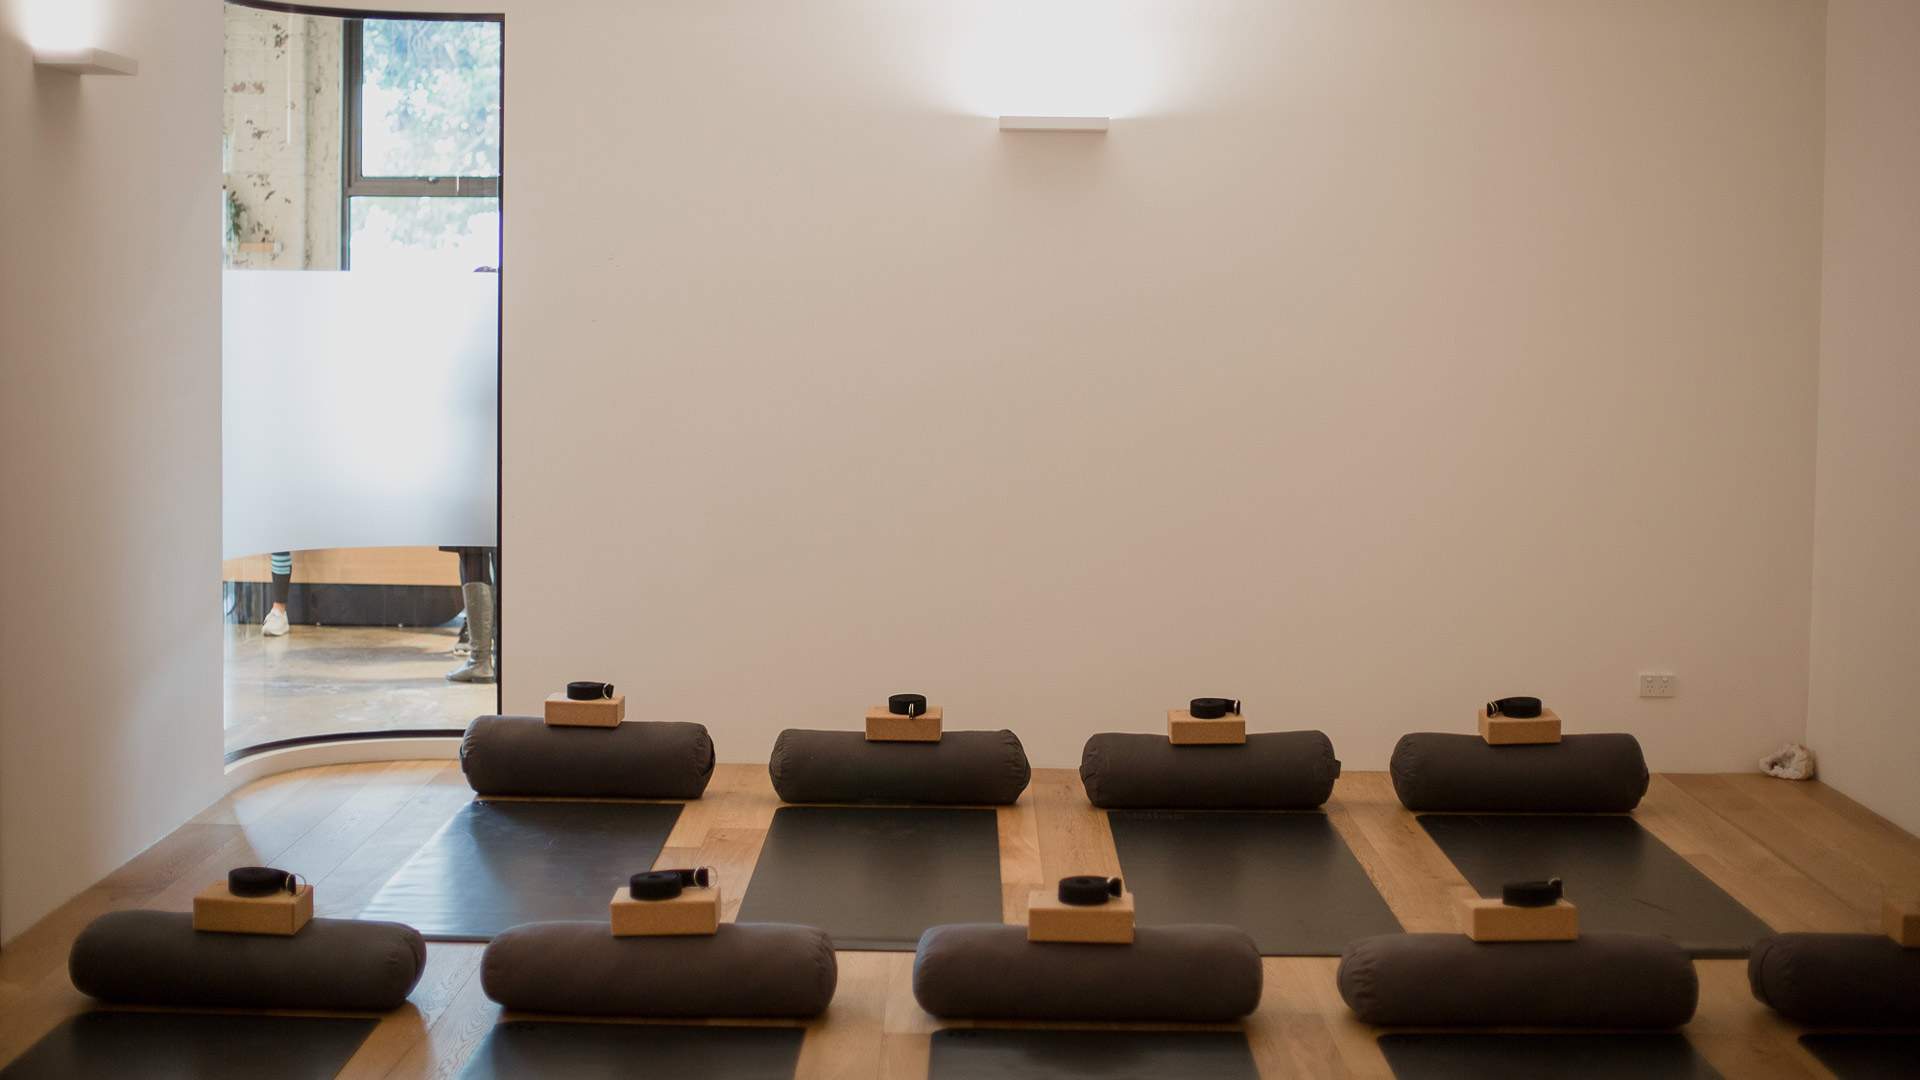 A Luxe New Wellness Centre and Yoga Studio Has Opened in Rosebery